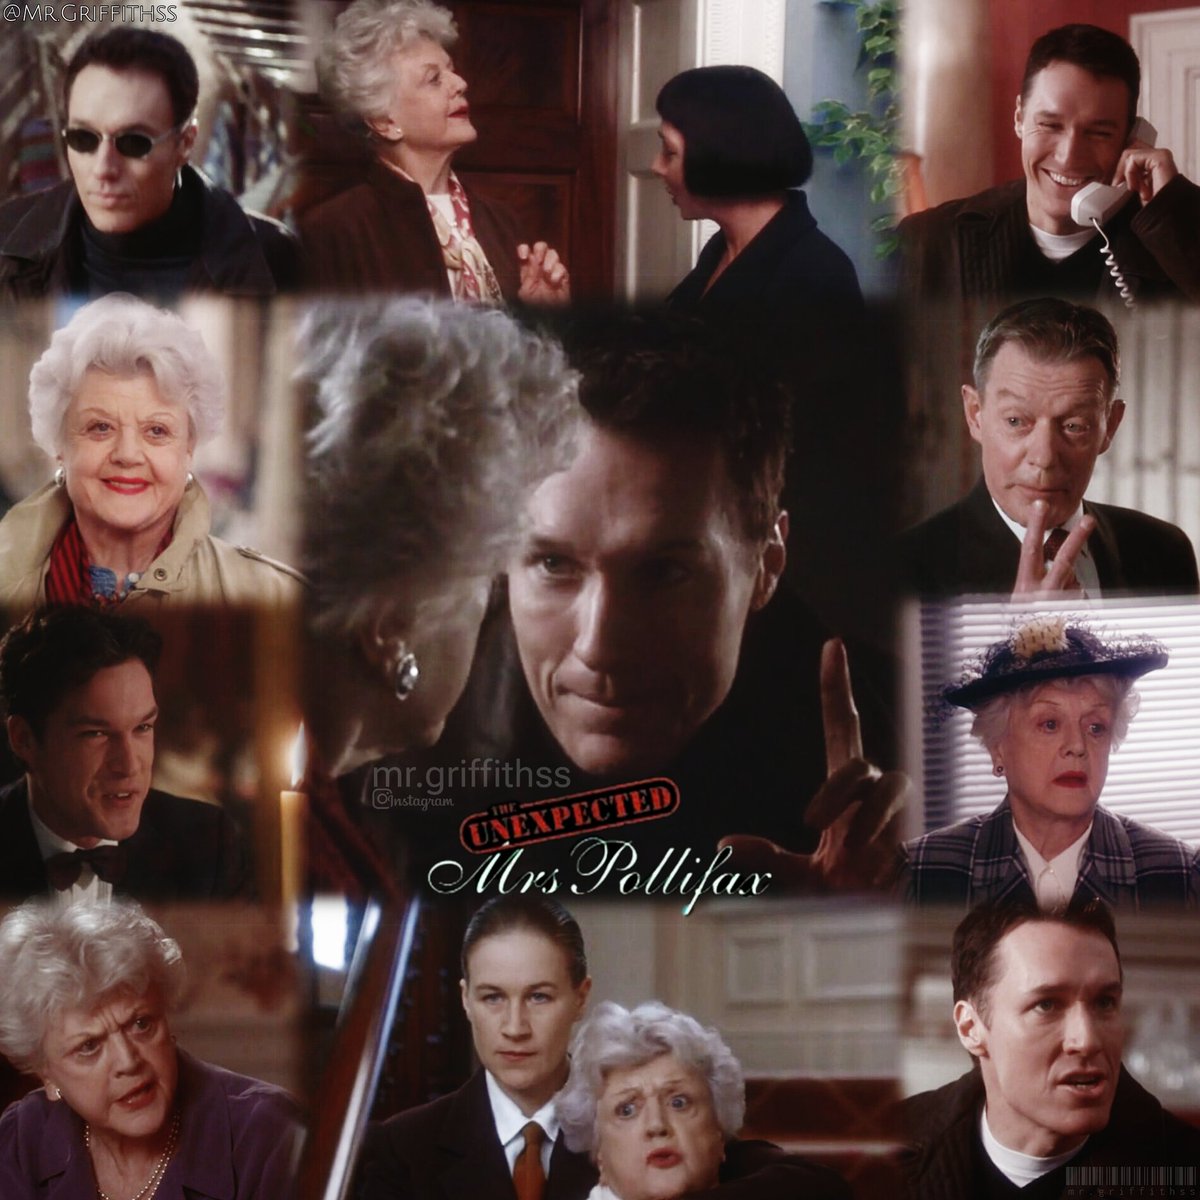 Nothings better than watching someone chase their ambitions after 60, even if it's being a spy!😏

#OnThisDay 25 years ago, #ThomasIanGriffith and #AngelaLansbury brought the mysteries of #DorothyGilman's book to life!🤍

#HappyAnniversary #JackFarrell #UnexpectedMrsPollifax #90s